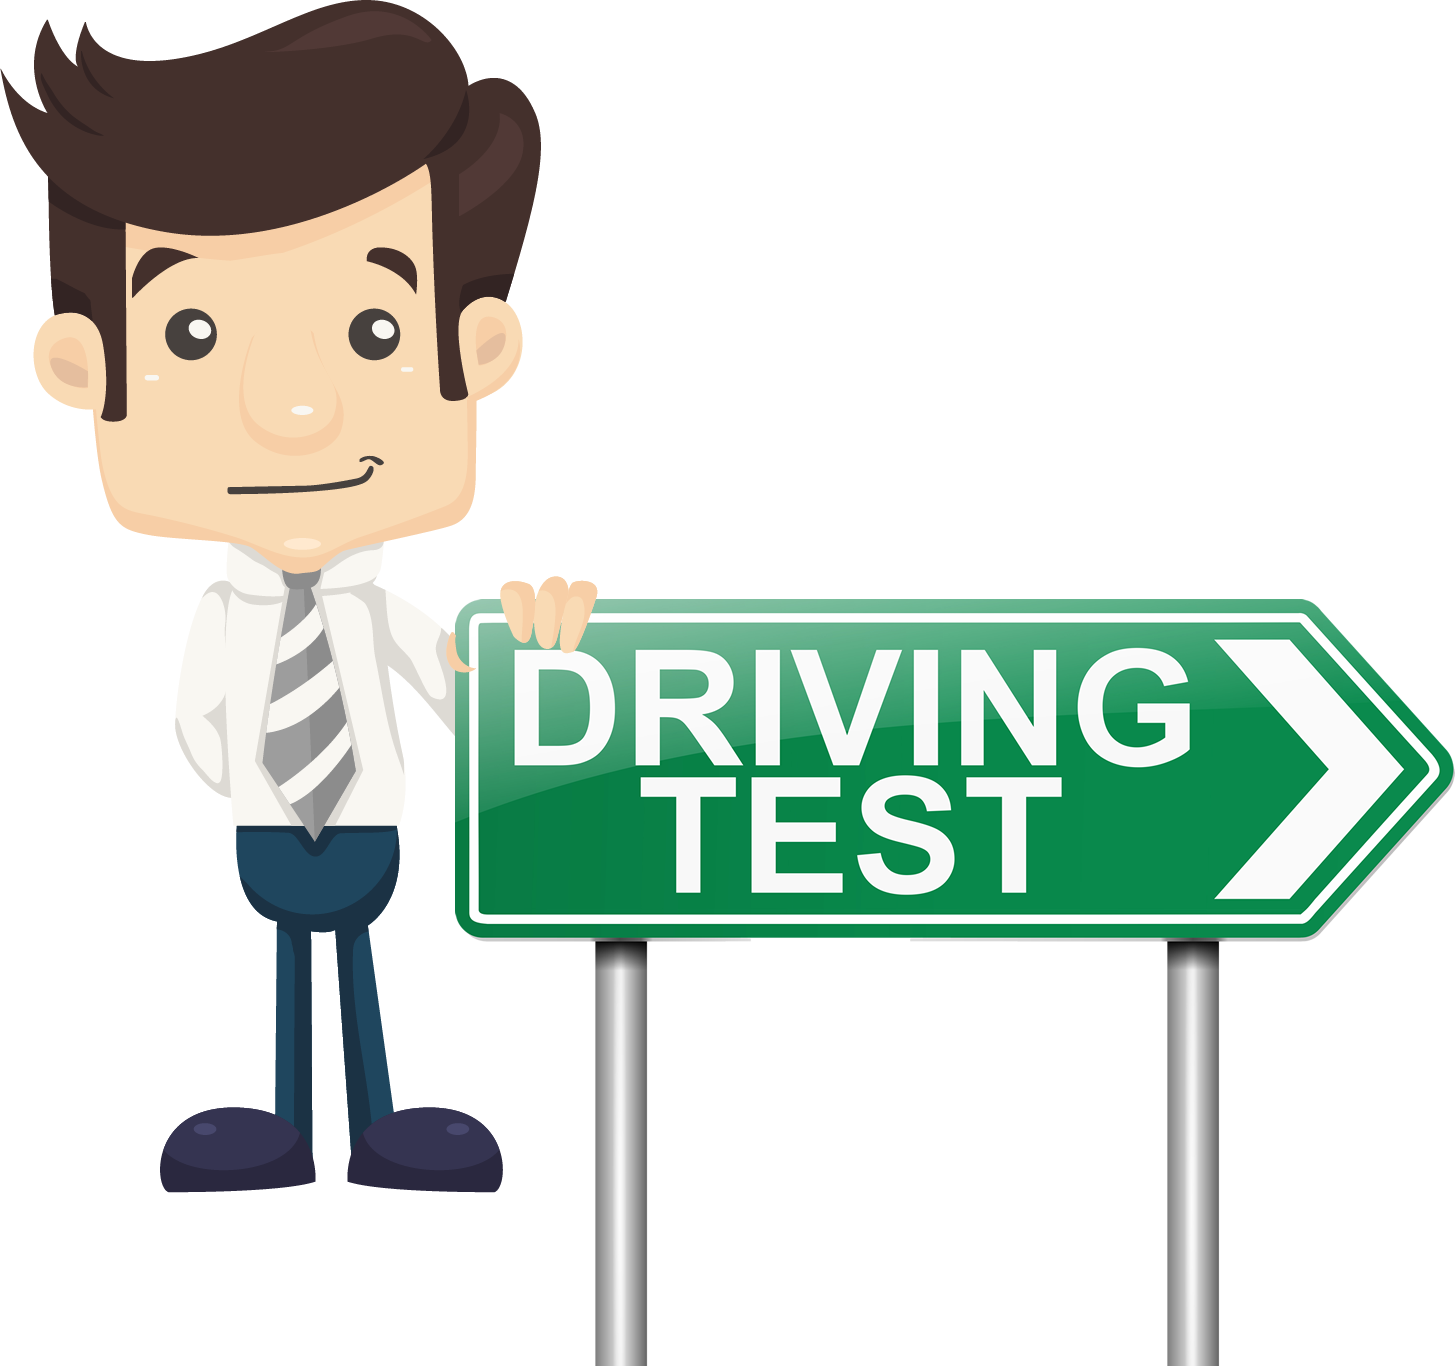 driving clipart driver test